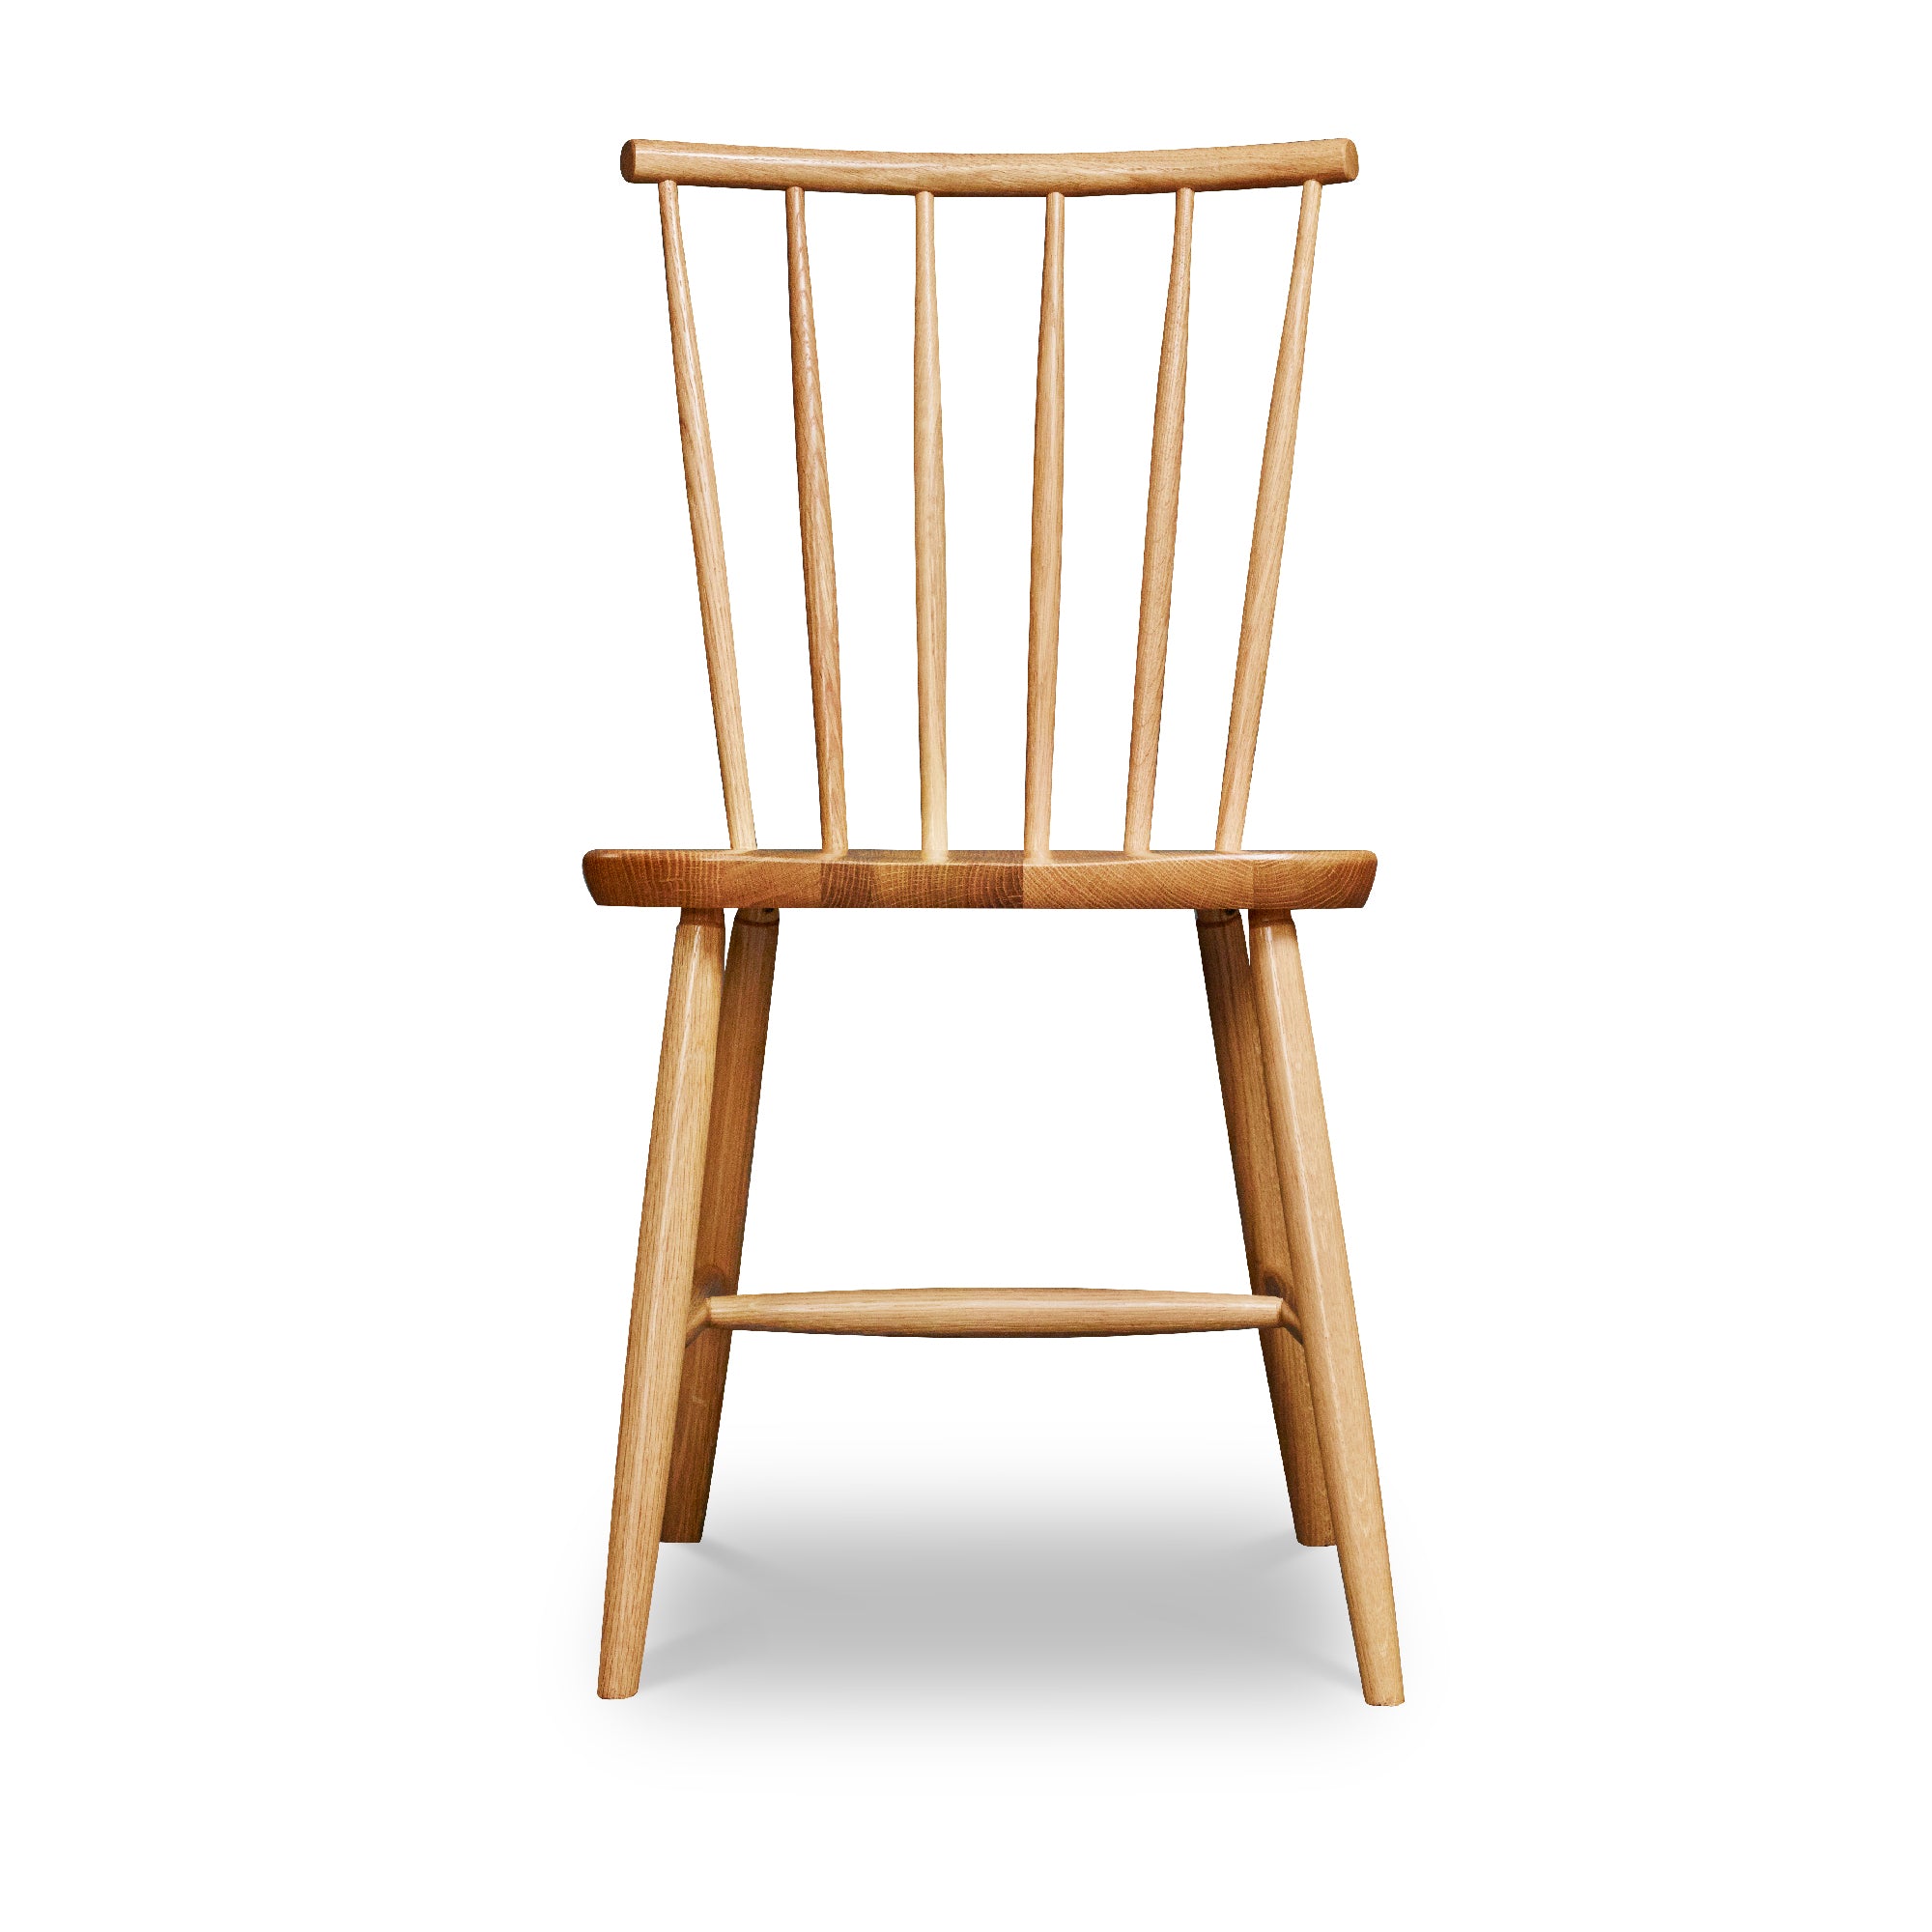 Windsor style chair with round crest in oak